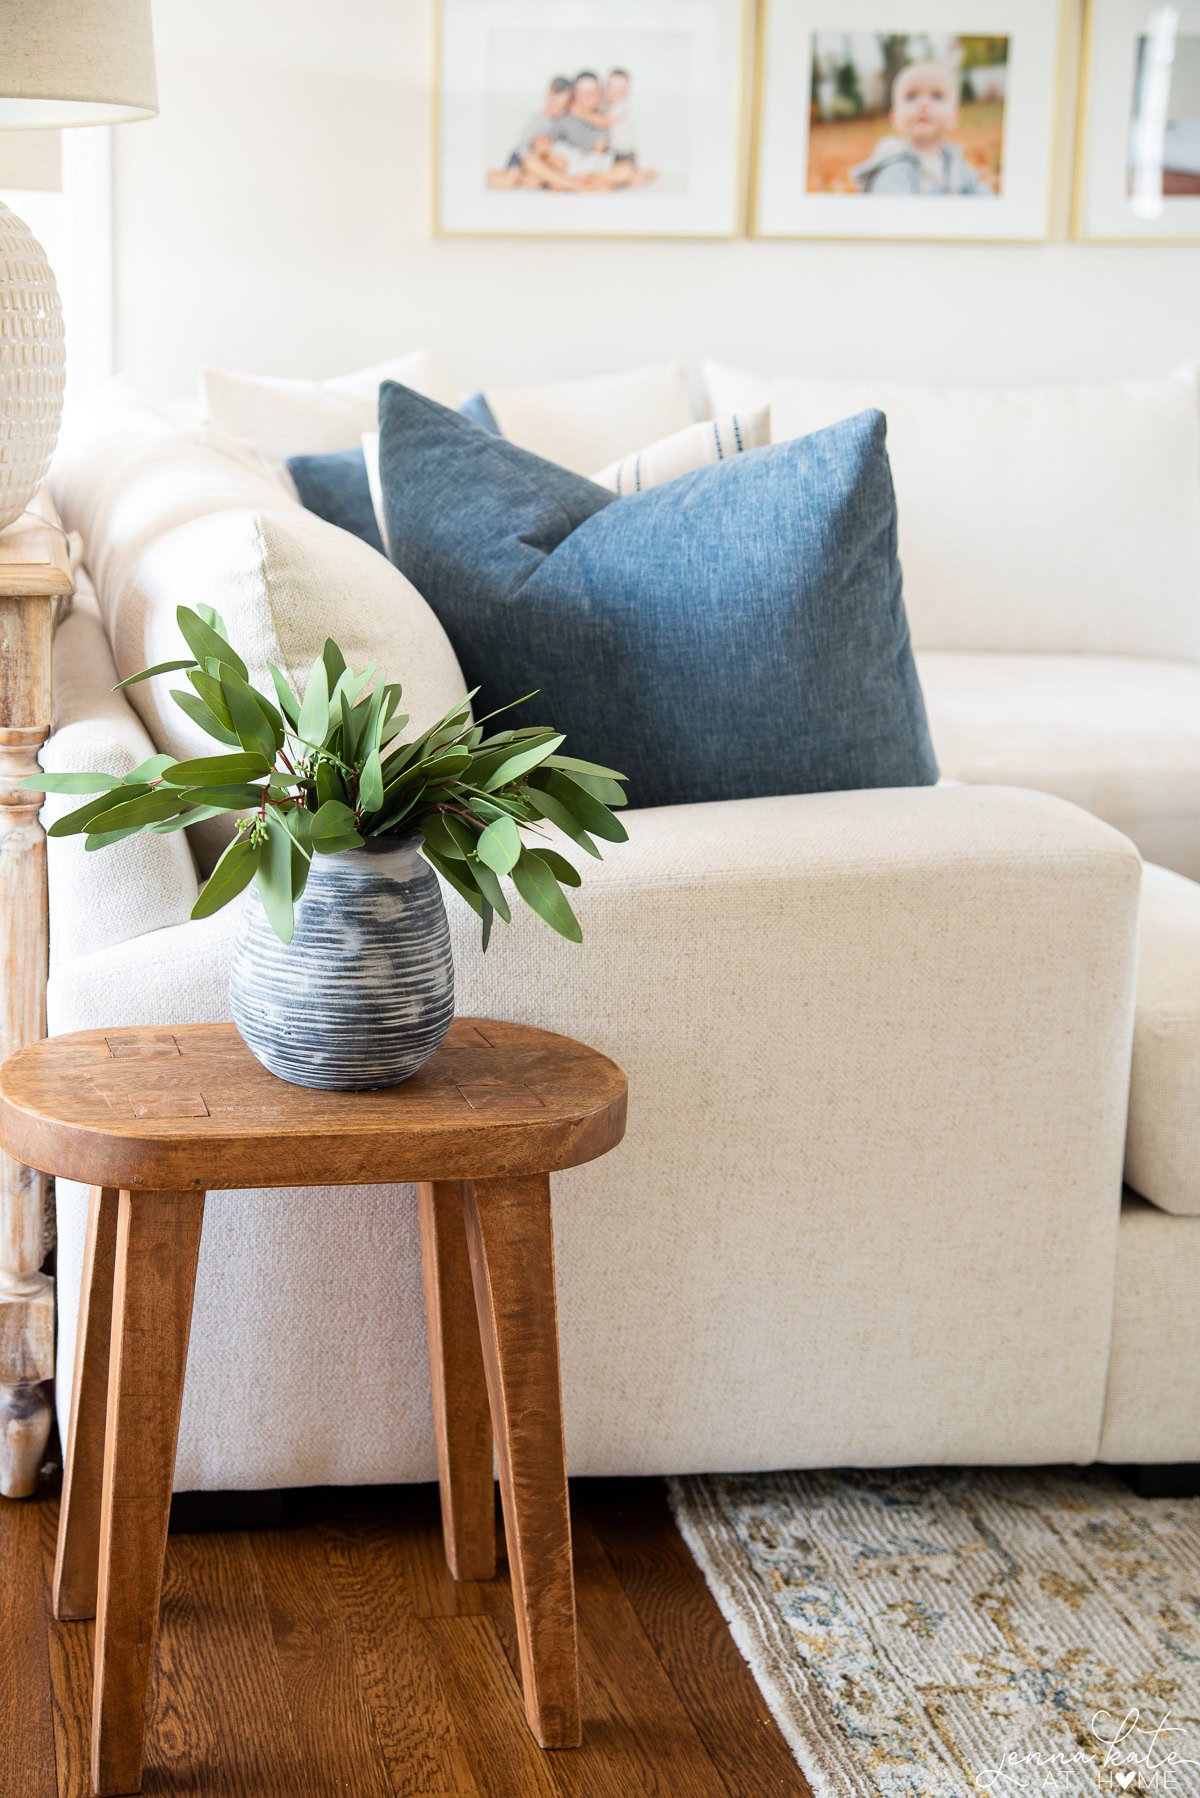 small accent table next to a white couch.